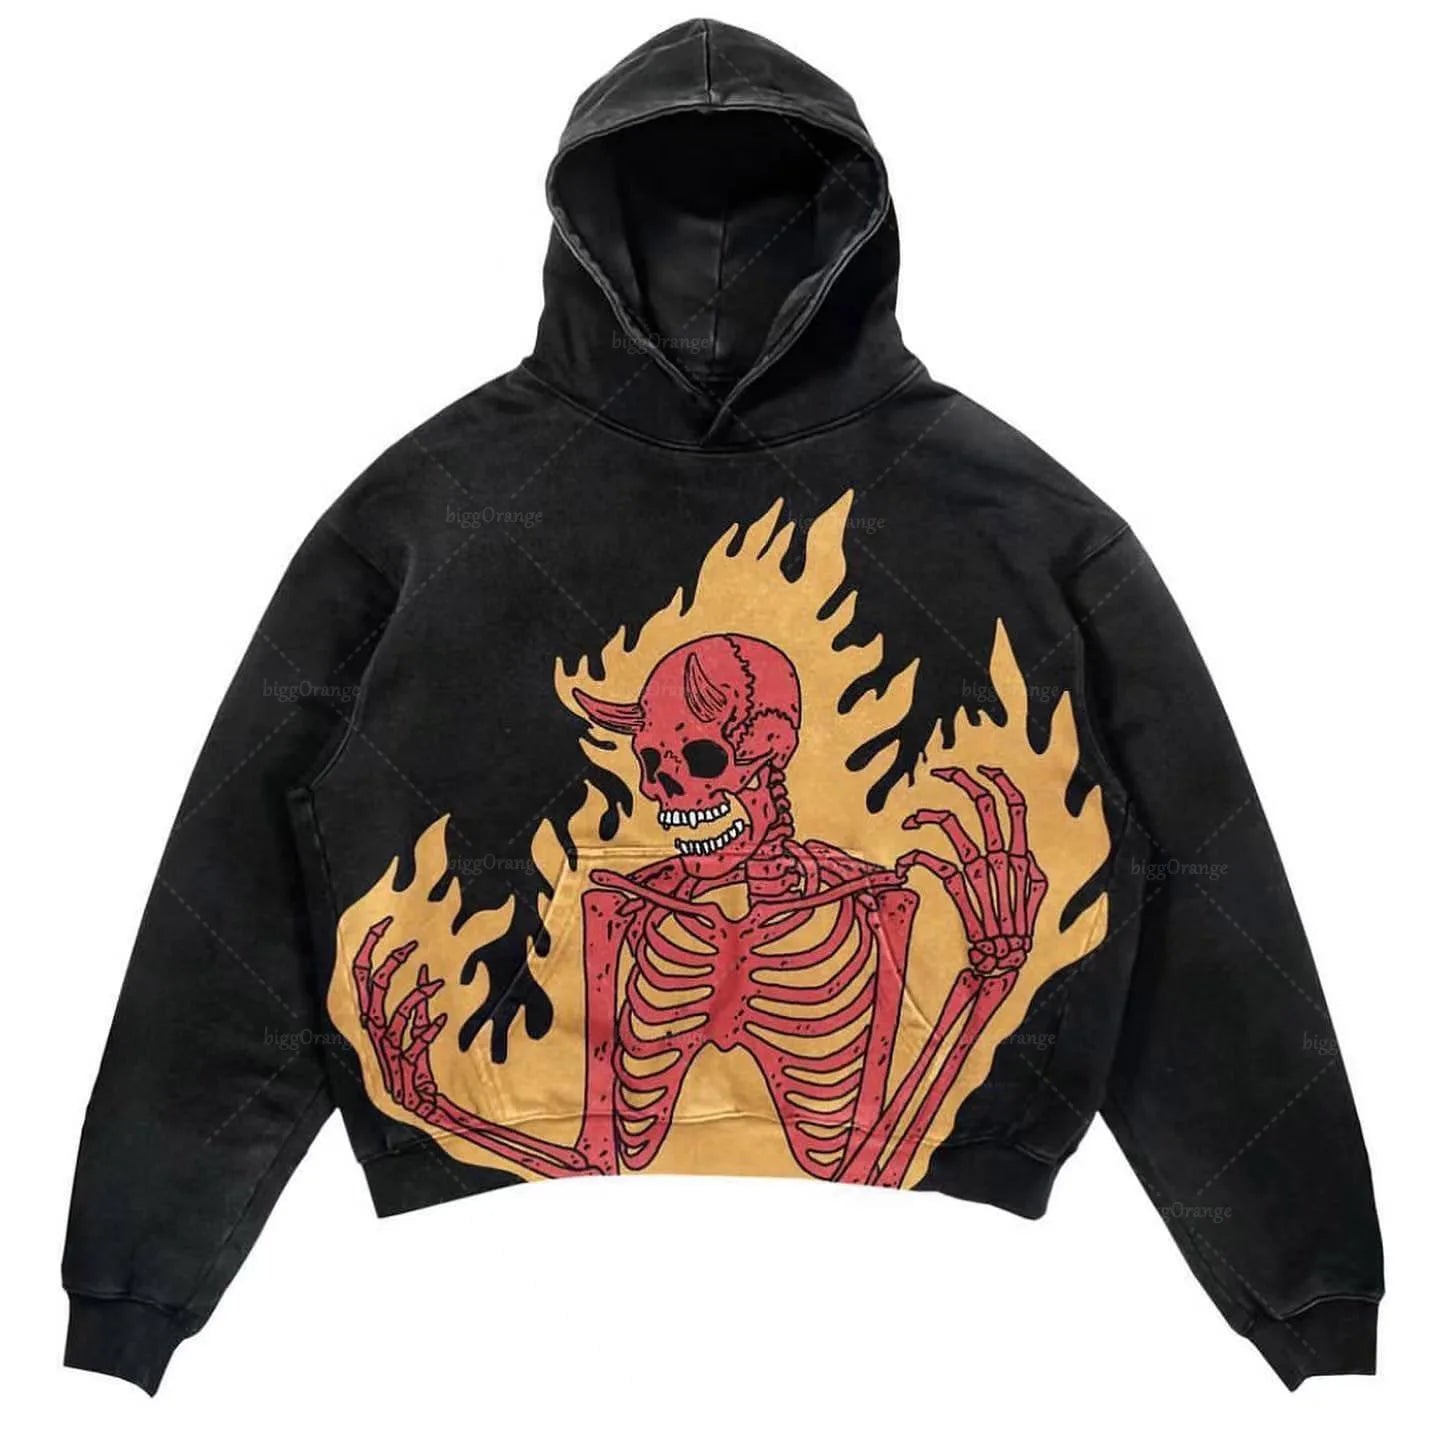 A Maramalive™ Explosions Printed Skull Y2K Retro Hooded Sweater Coat Street Style Gothic Casual Fashion Hooded Sweater Men's Female featuring a striking graphic design of a red skeletal figure with horns, surrounded by flames.